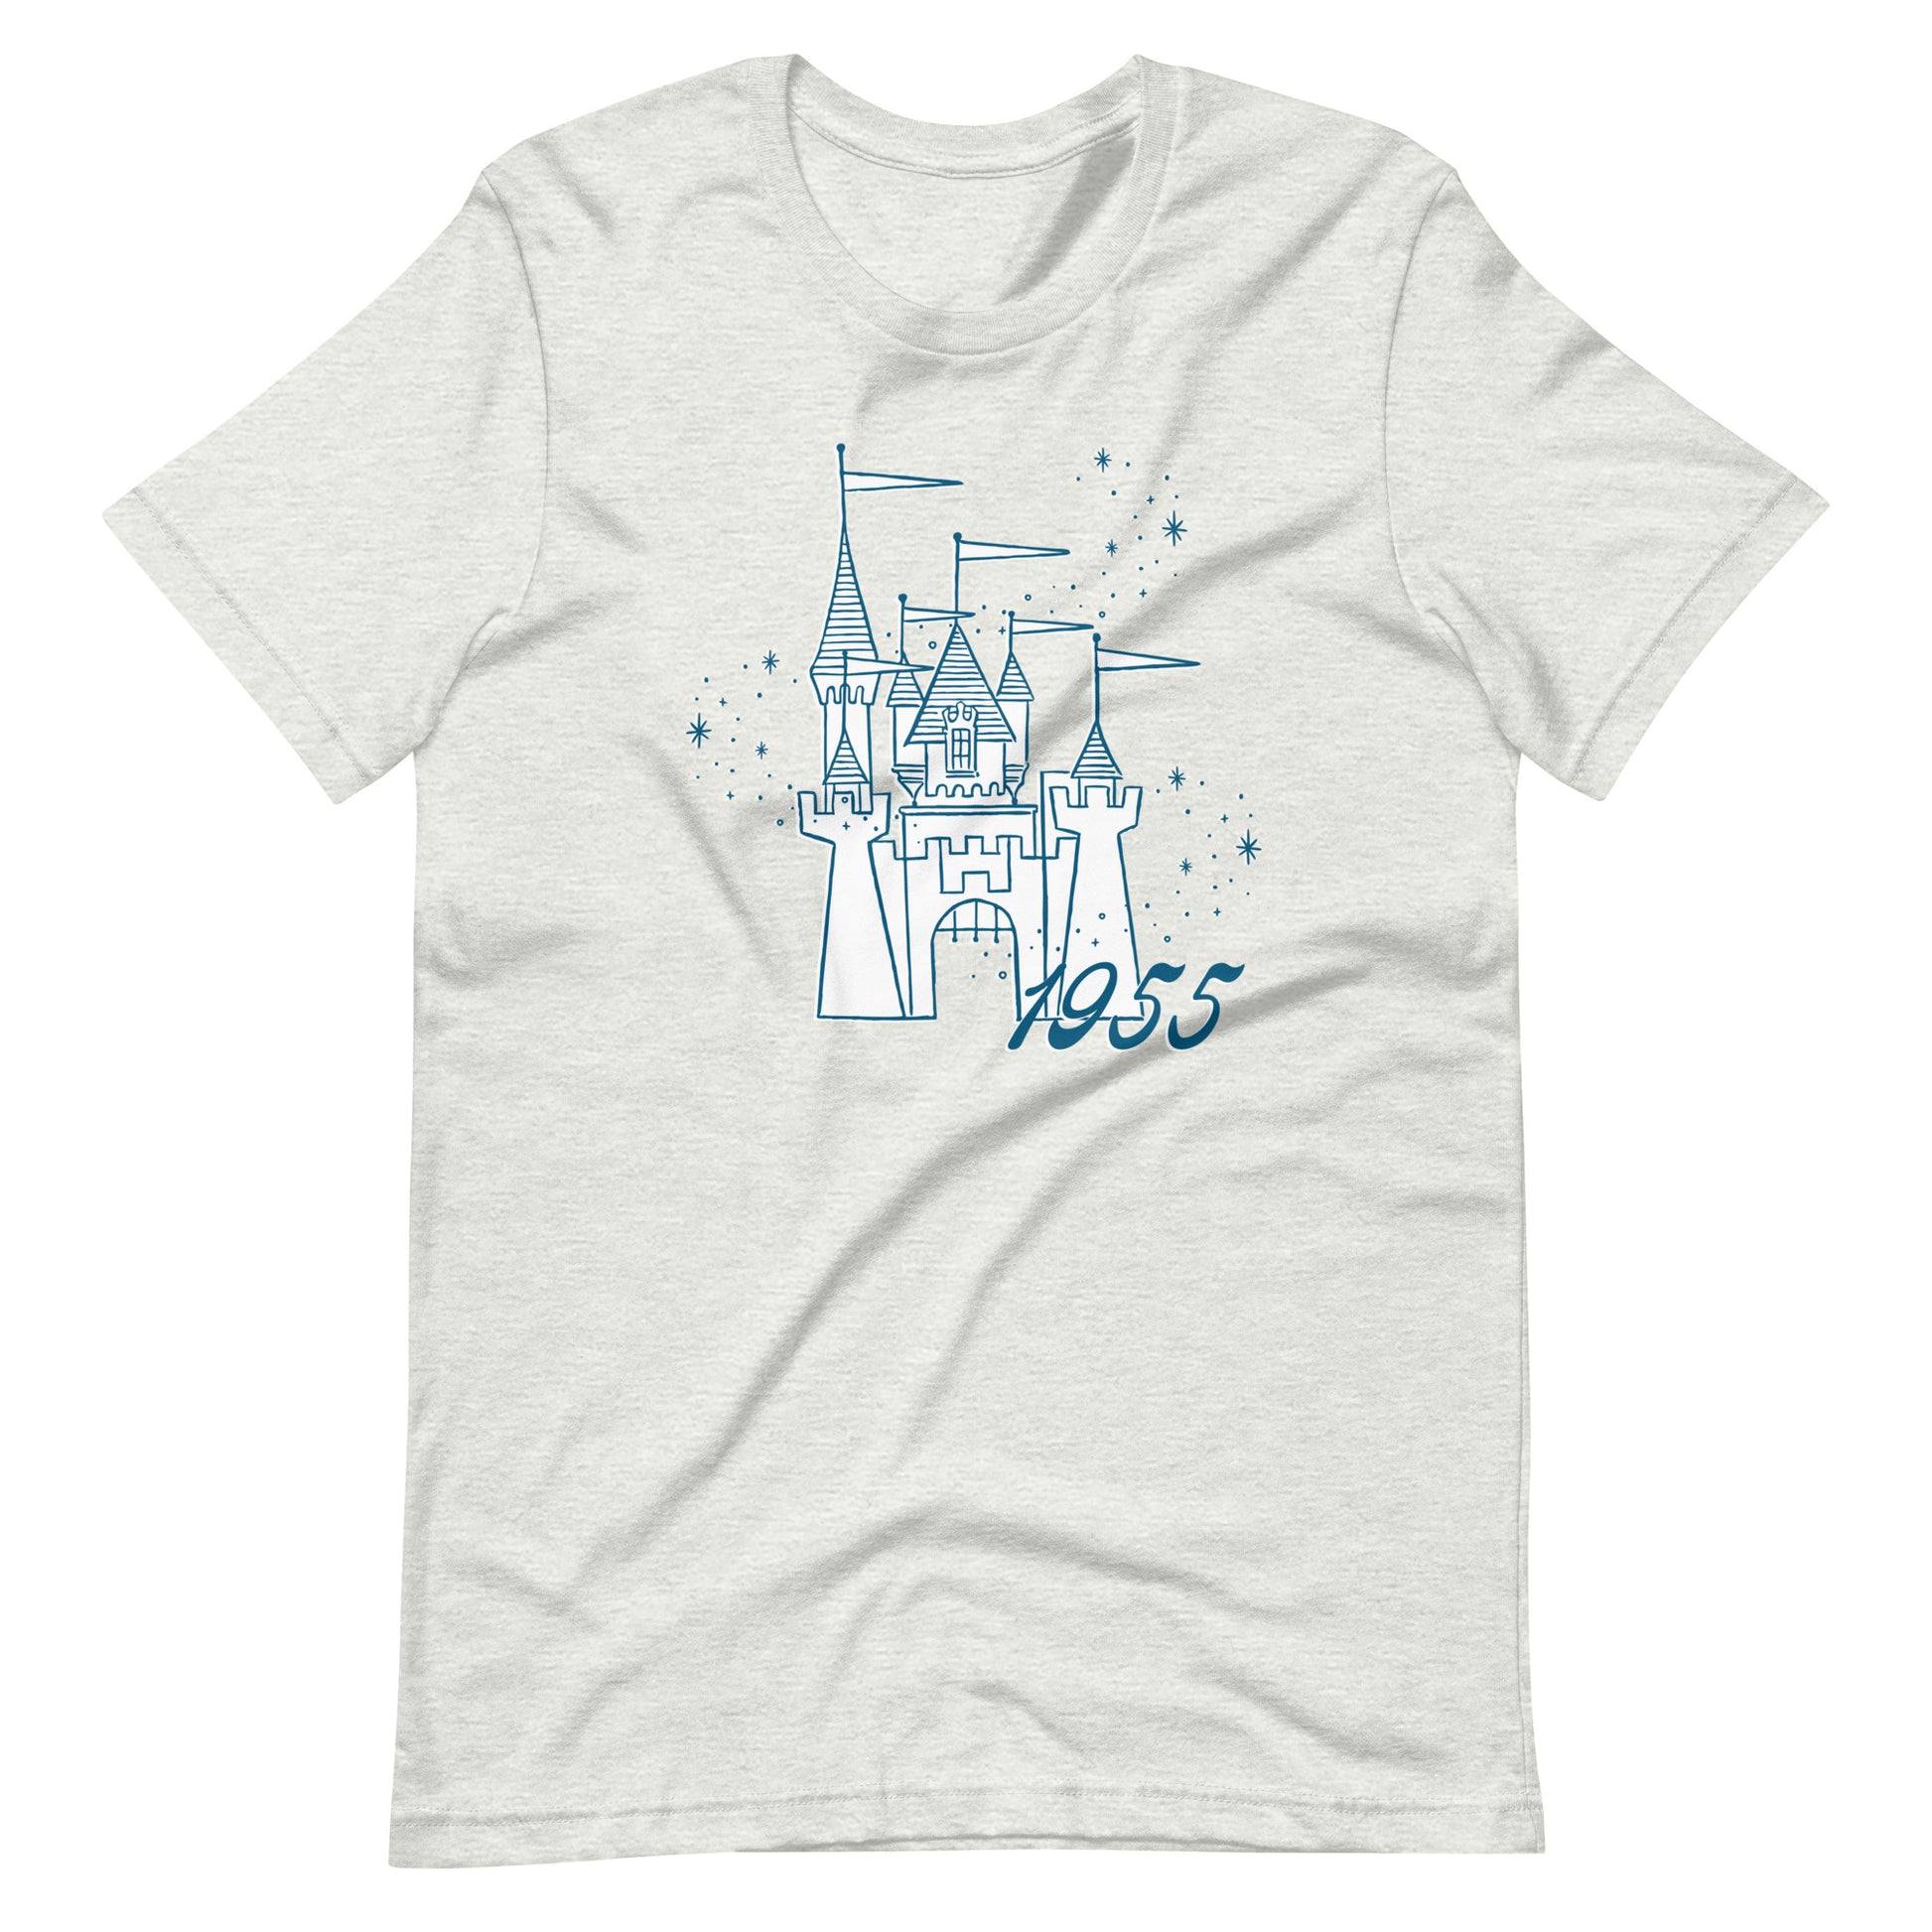 Heather ash colored shirt printed with vintage style sketch of the Disneyland Castle, the year 1955, and pixie dust above the castle.